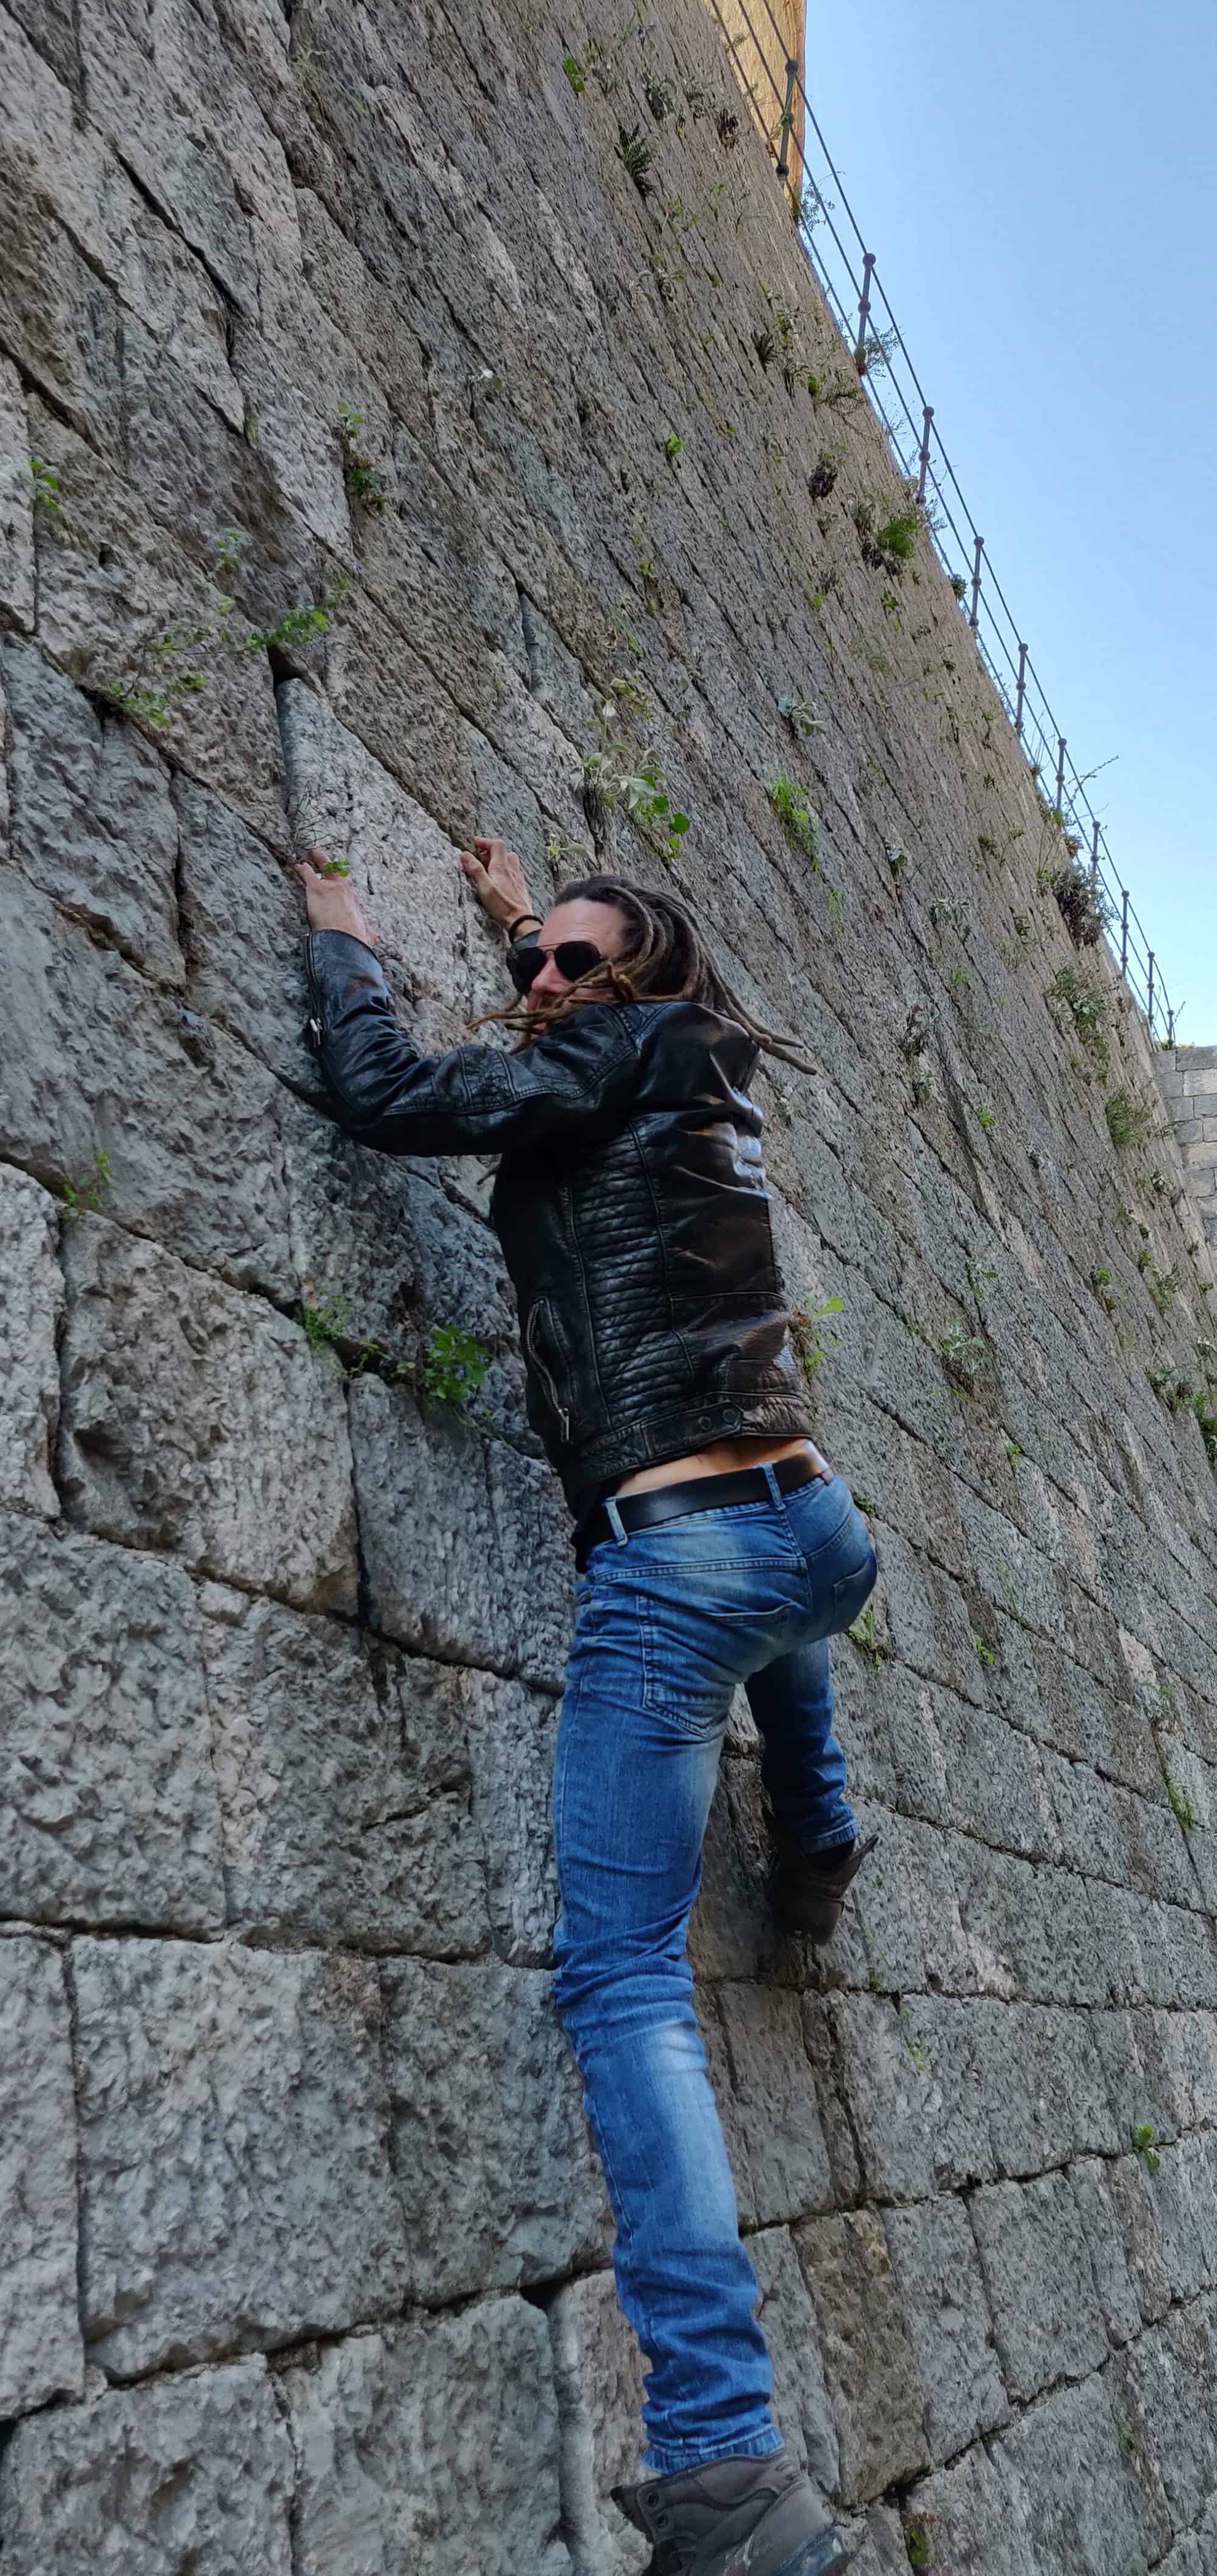 Mike is climbing on the city wall